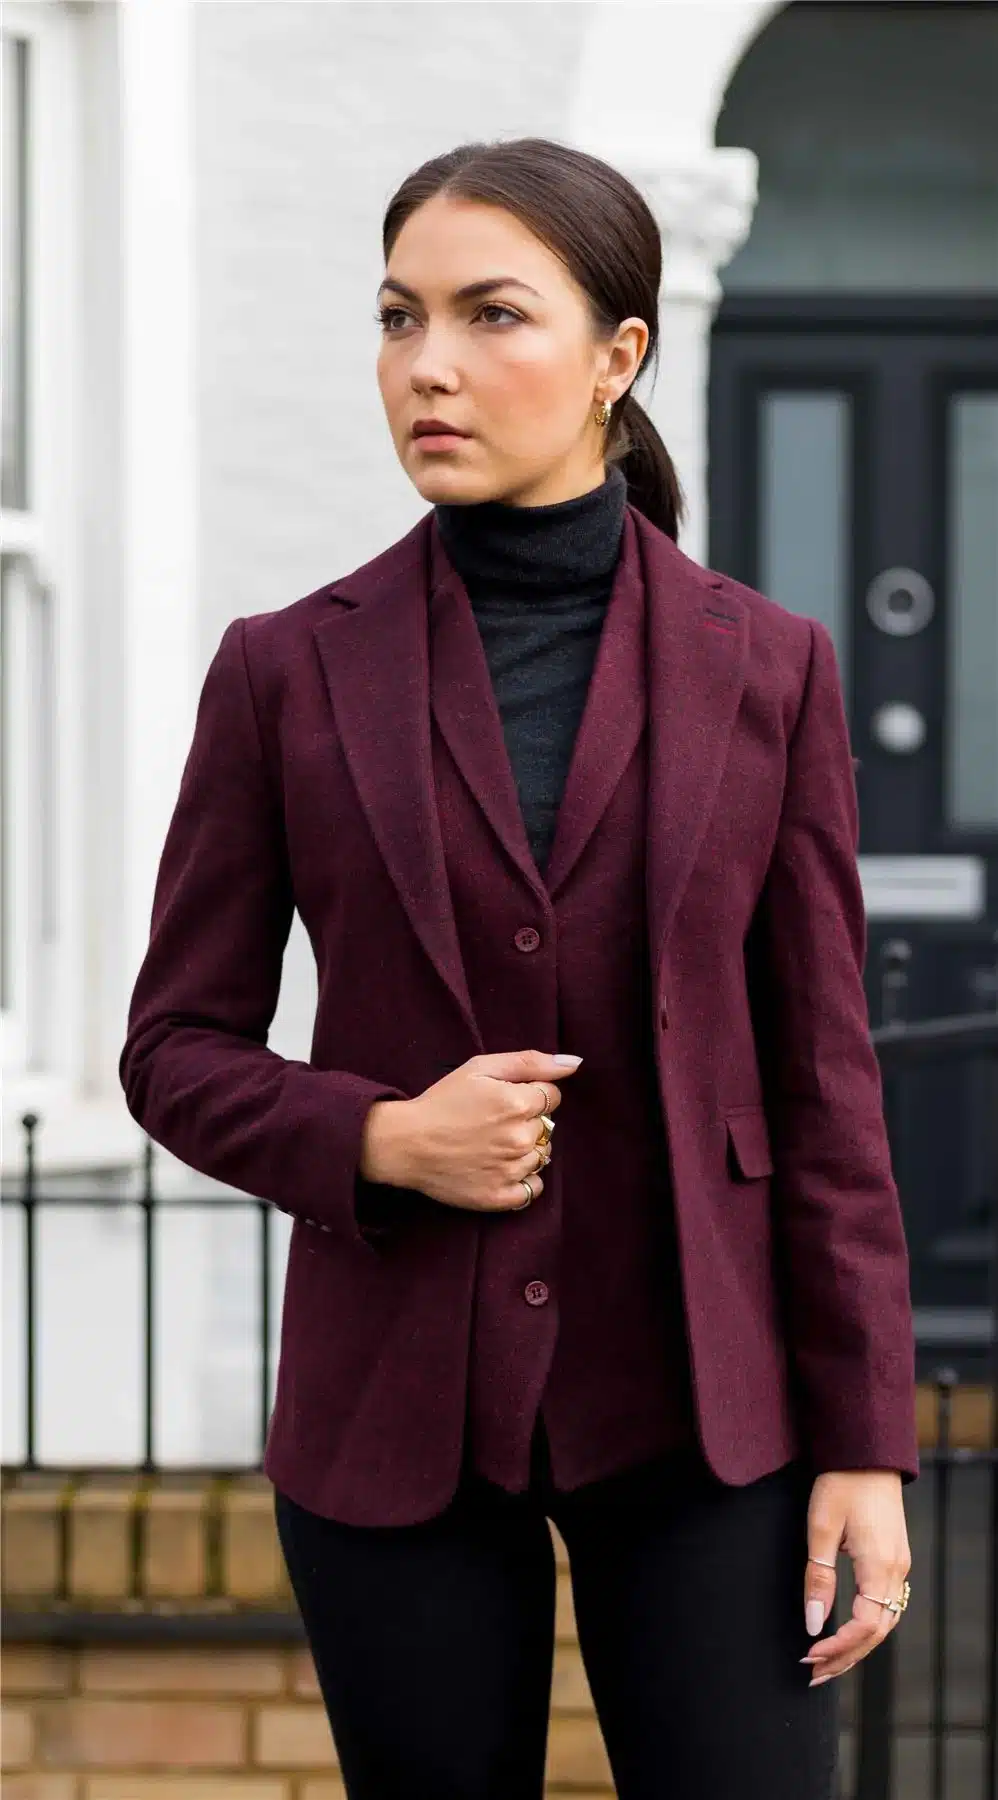 Woman Blazer Pictures | Download Free Images on Unsplash